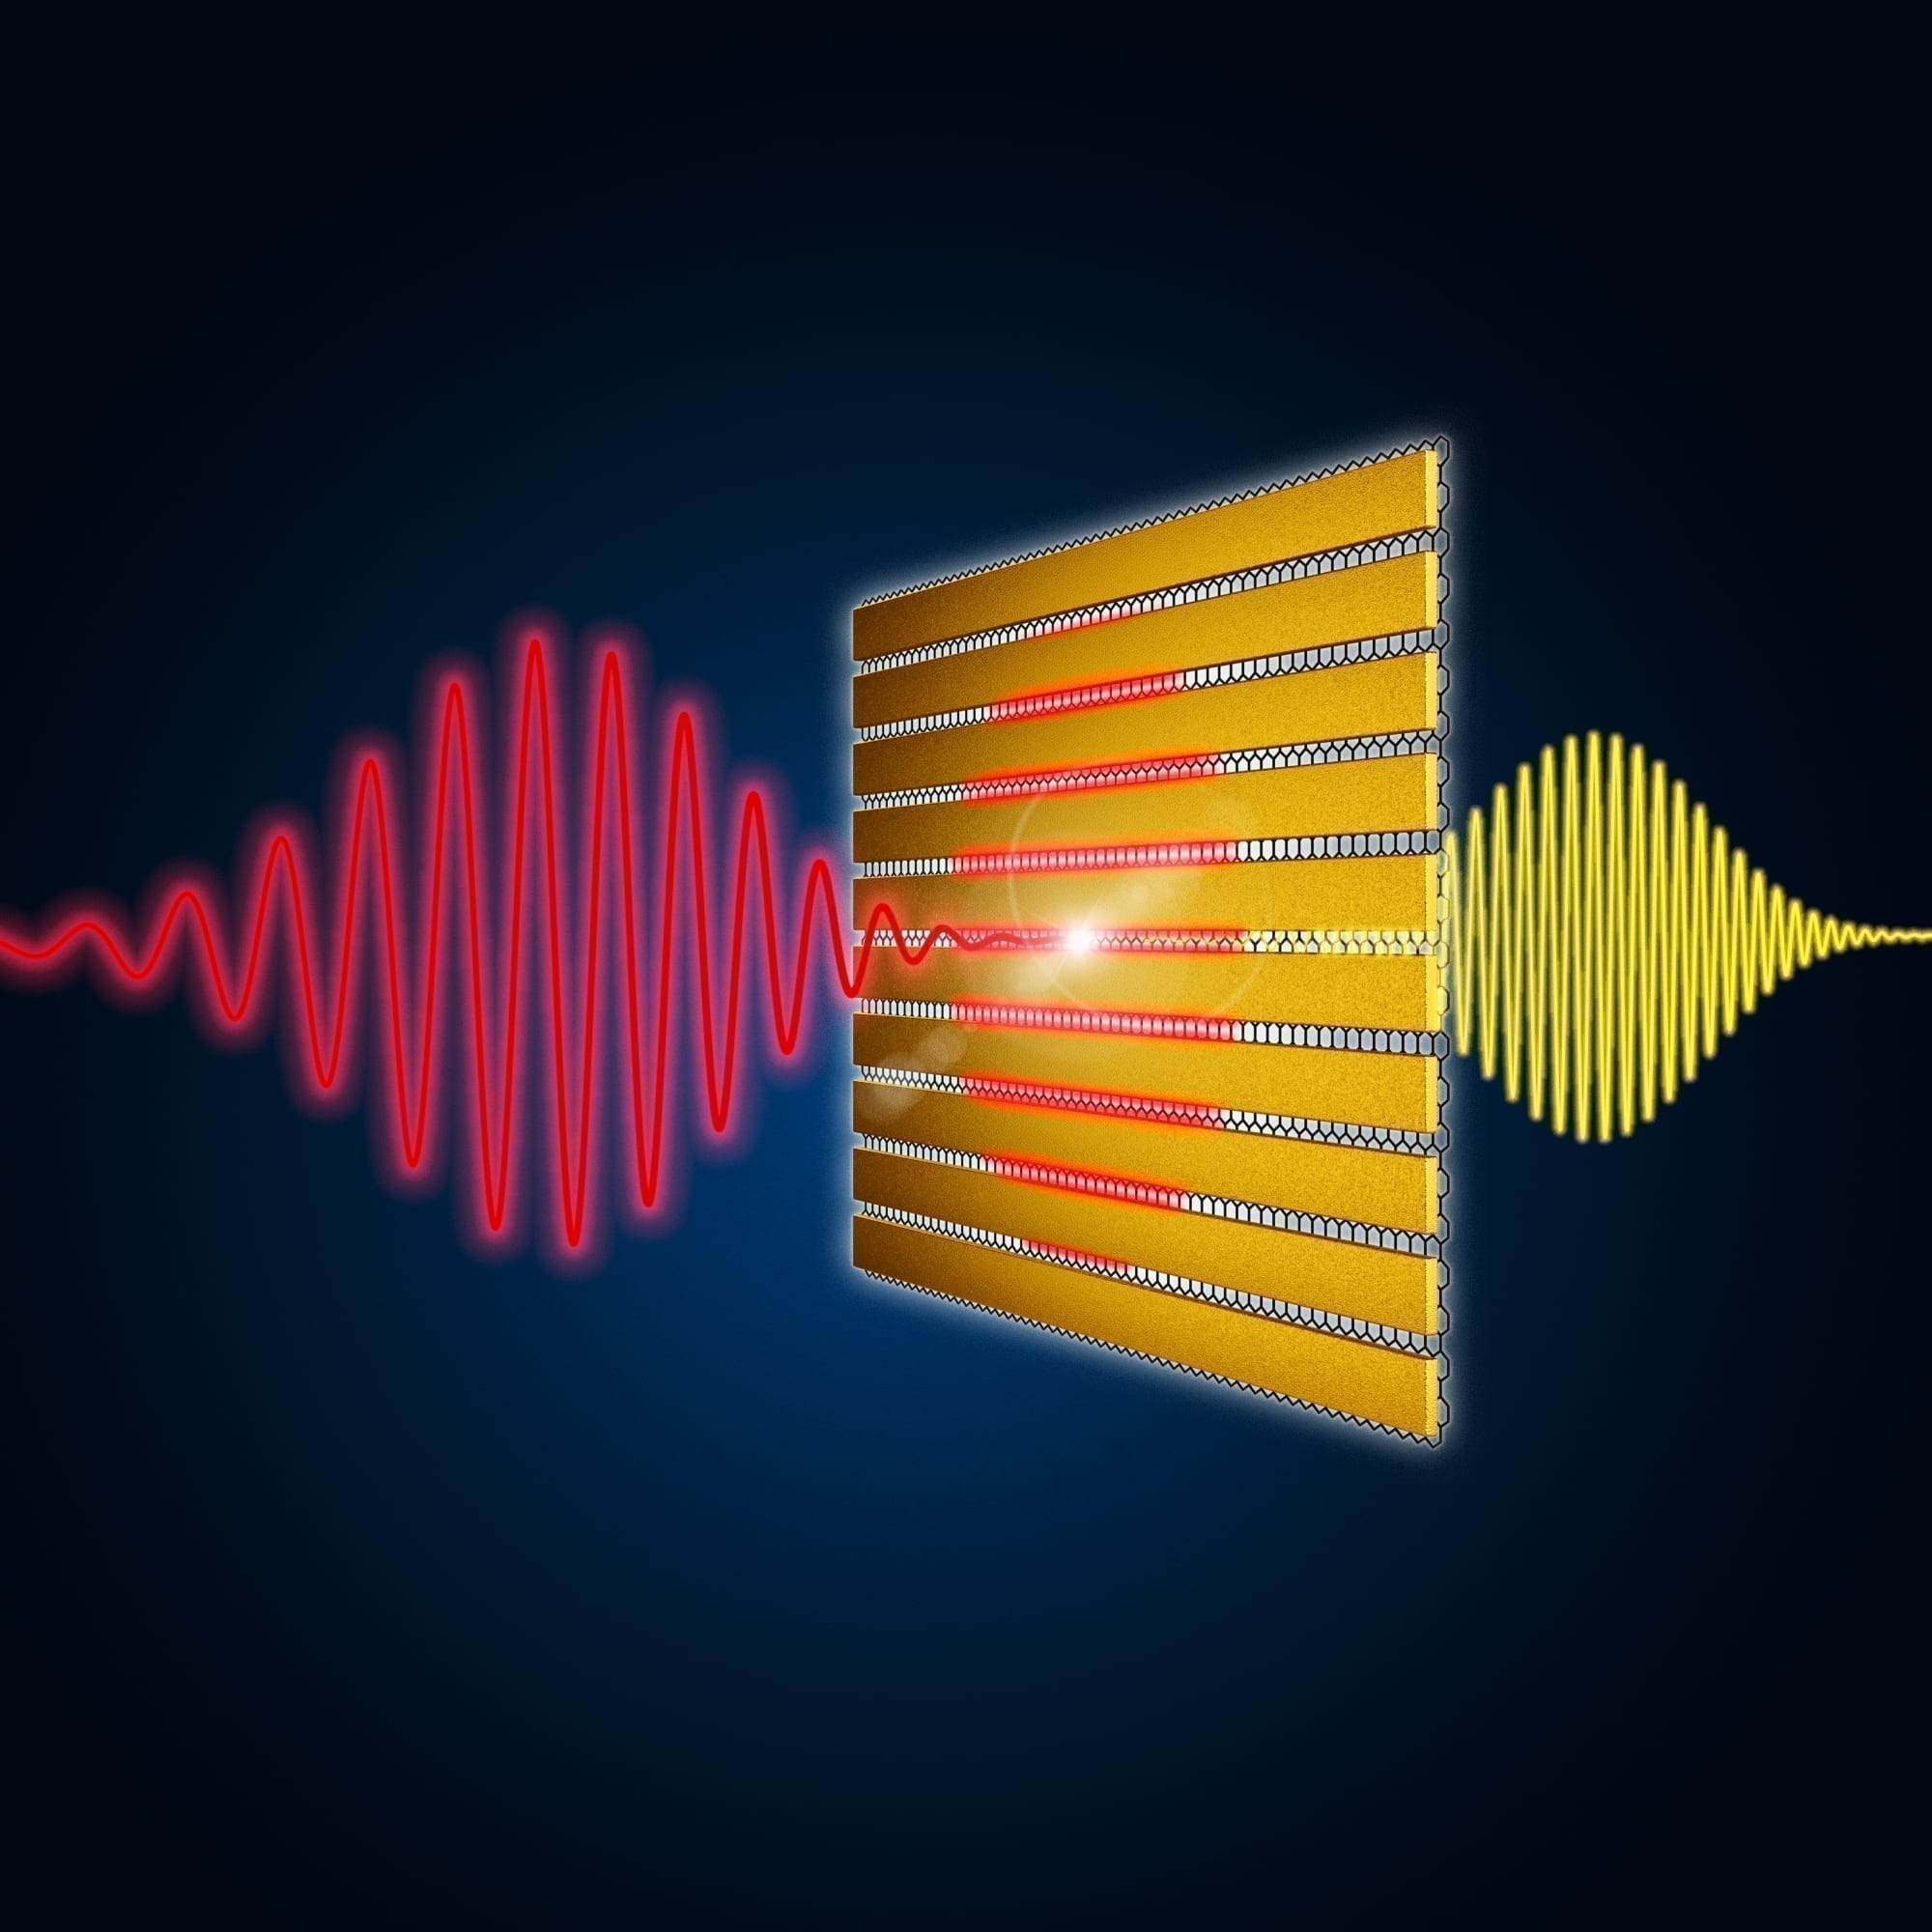 Research team develops new material system to convert and generate terahertz waves